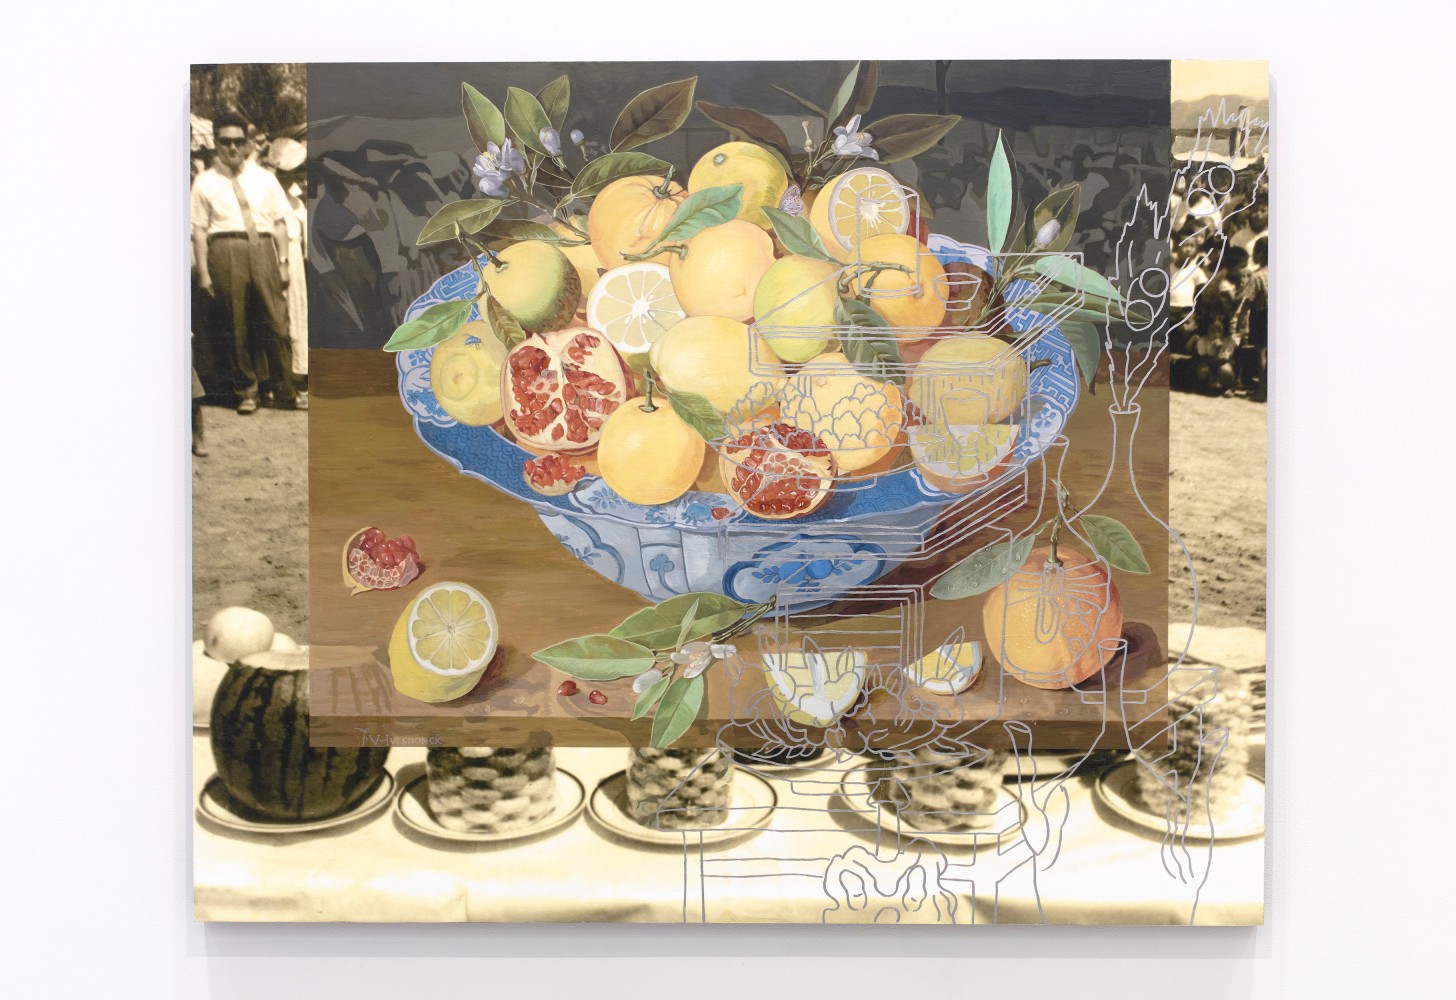 One mixed media painting featuring a bowl of fruit on a table overlay a photo.